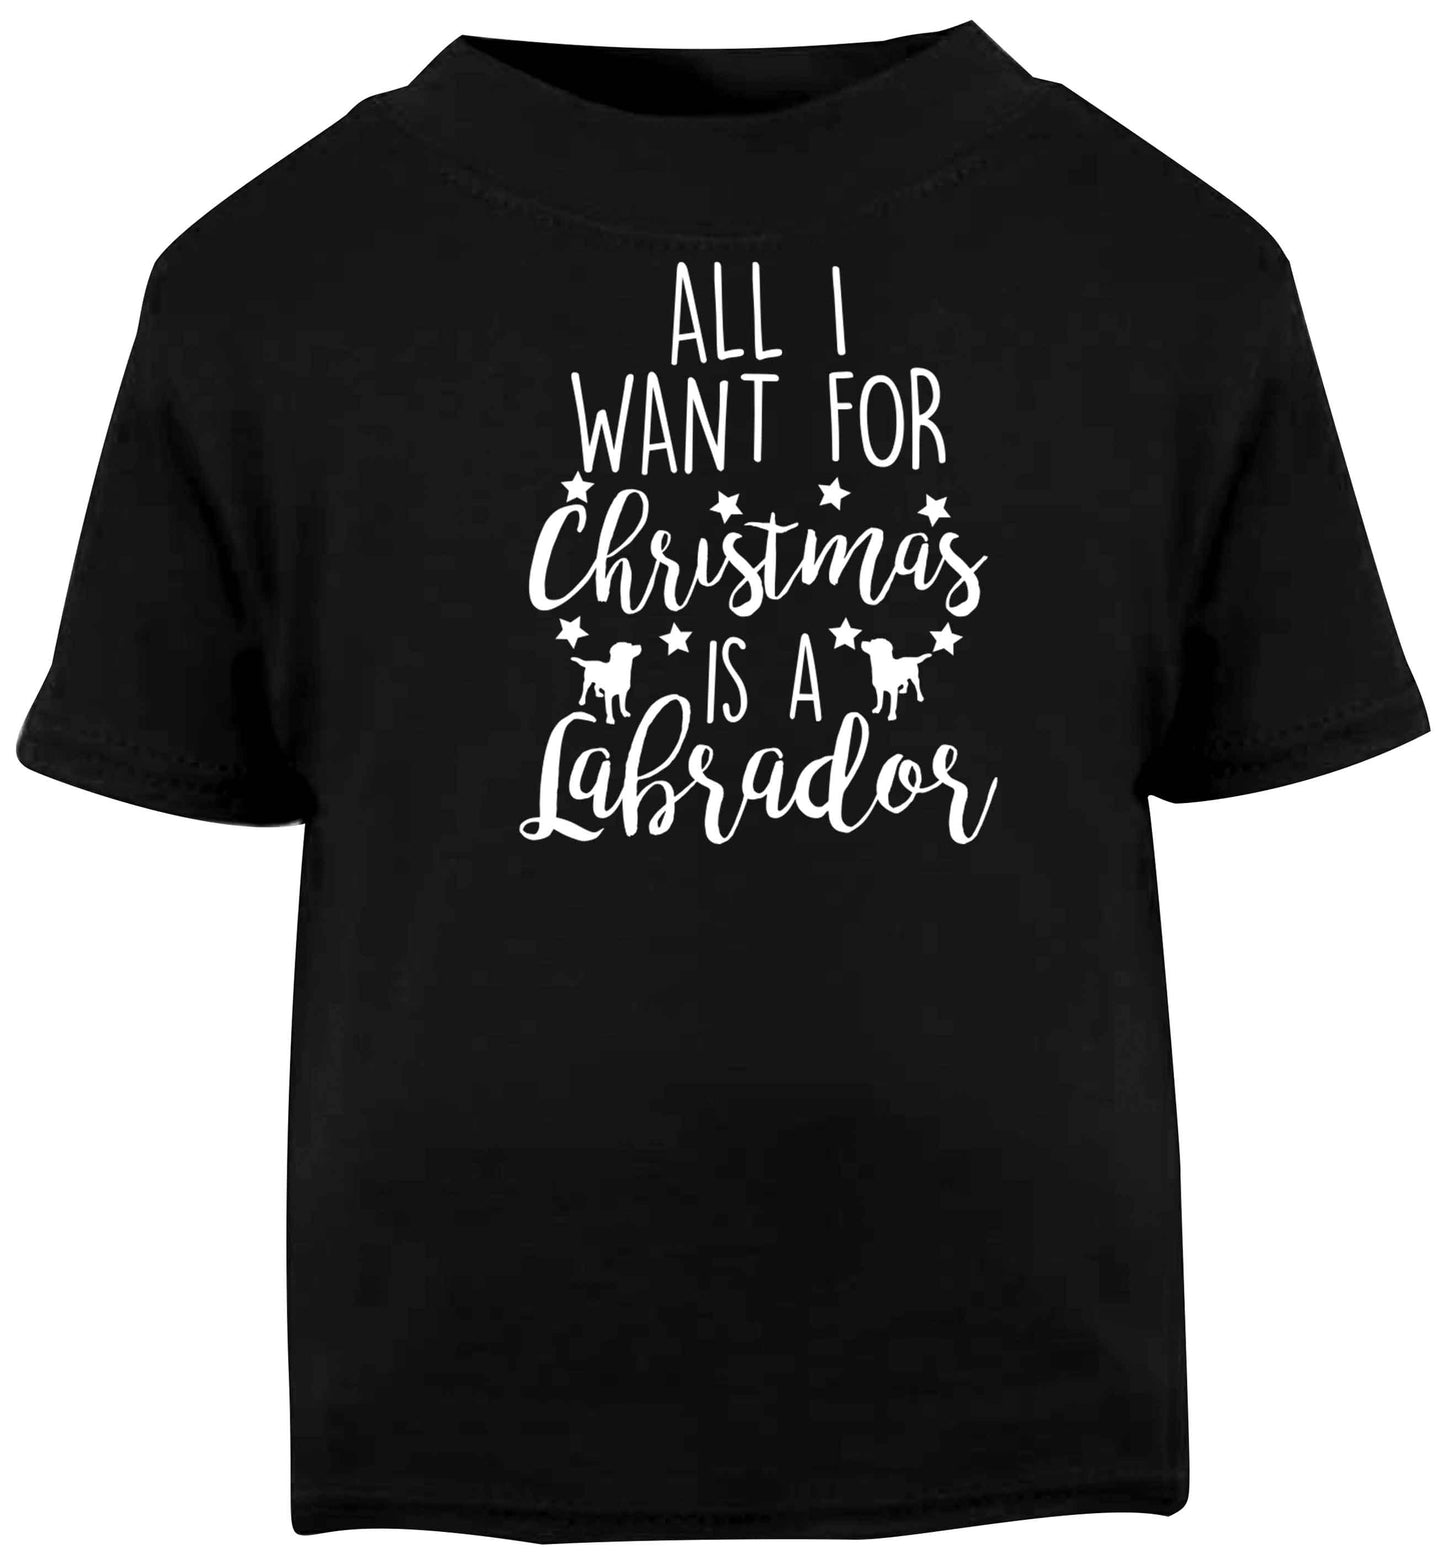 All I want for Christmas is a labrador Black baby toddler Tshirt 2 years